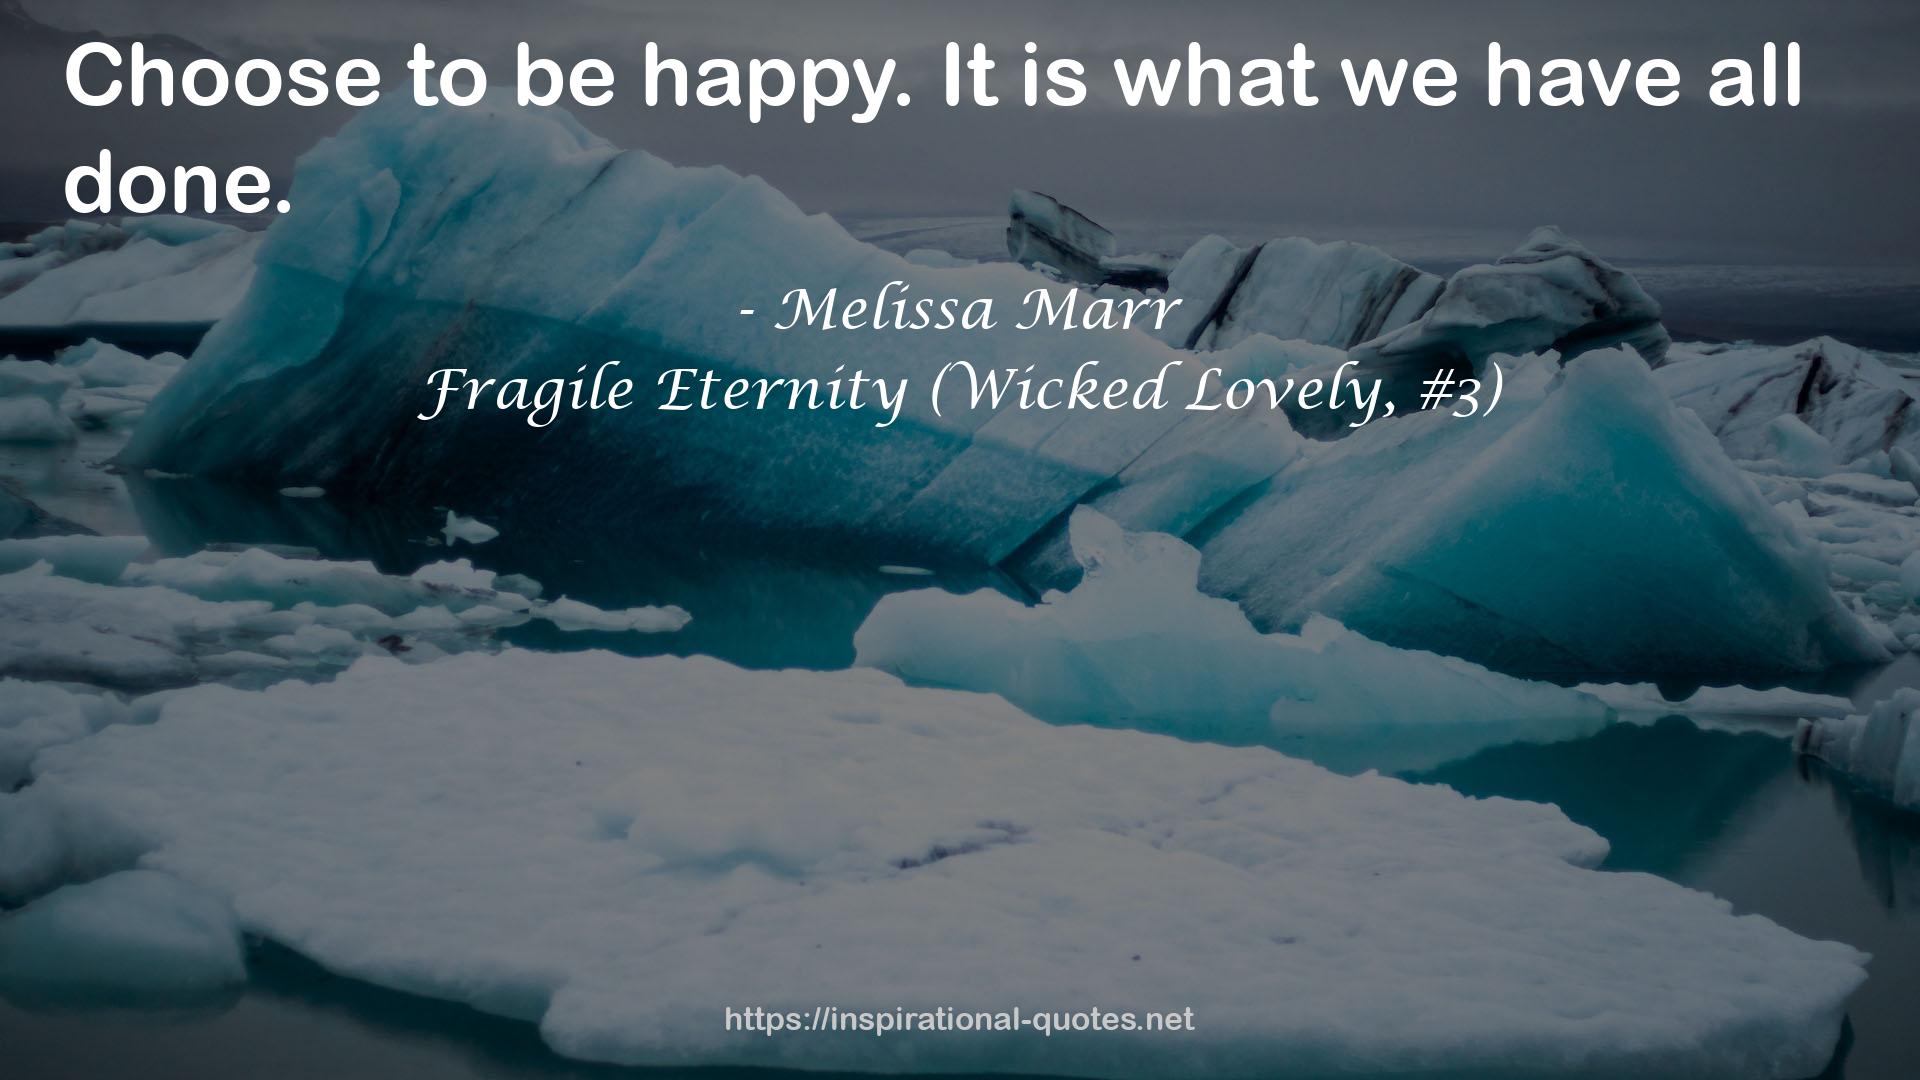 Fragile Eternity (Wicked Lovely, #3) QUOTES